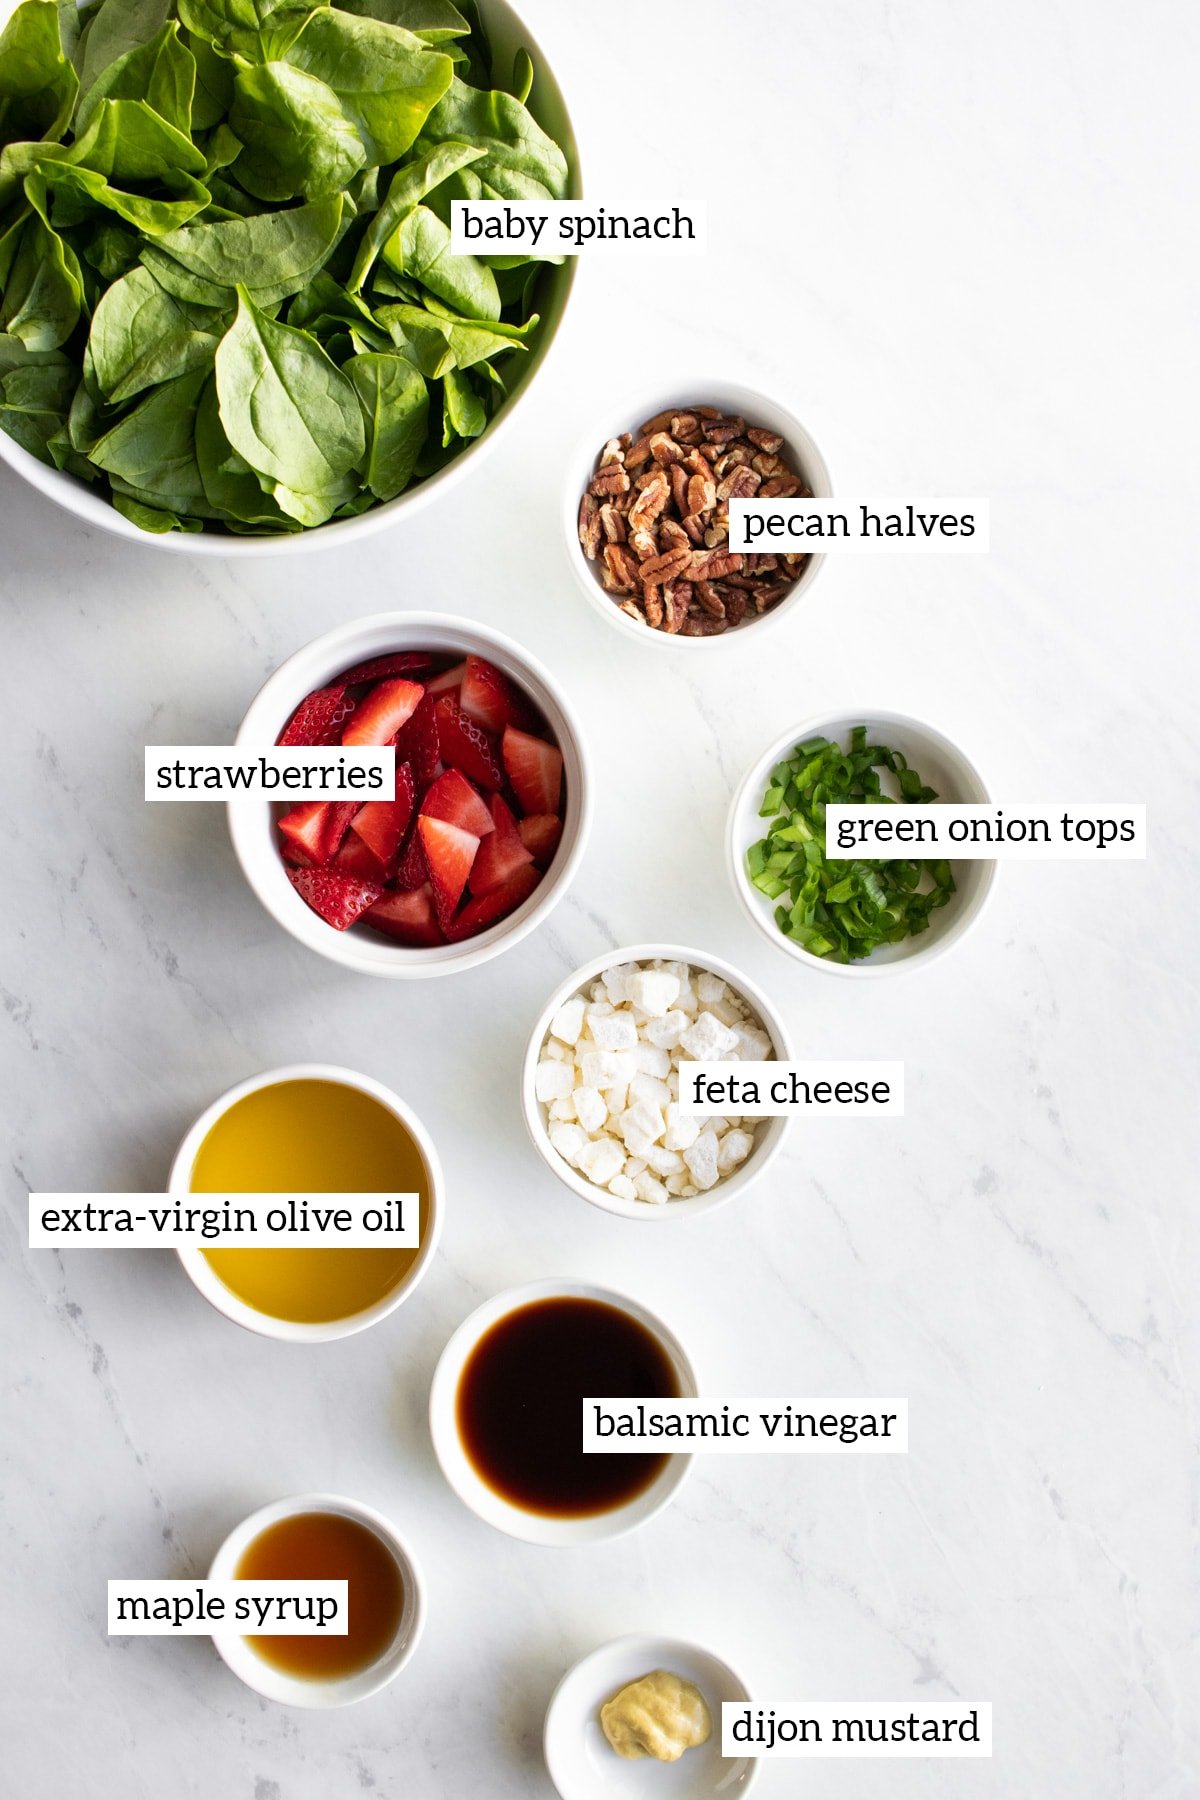 The ingredients needed for low FODMAP strawberry spinach salad are measured into small white bowls. The bowls are arranged artistically on a white marble slab. Each ingredient has a text overlay naming the food.